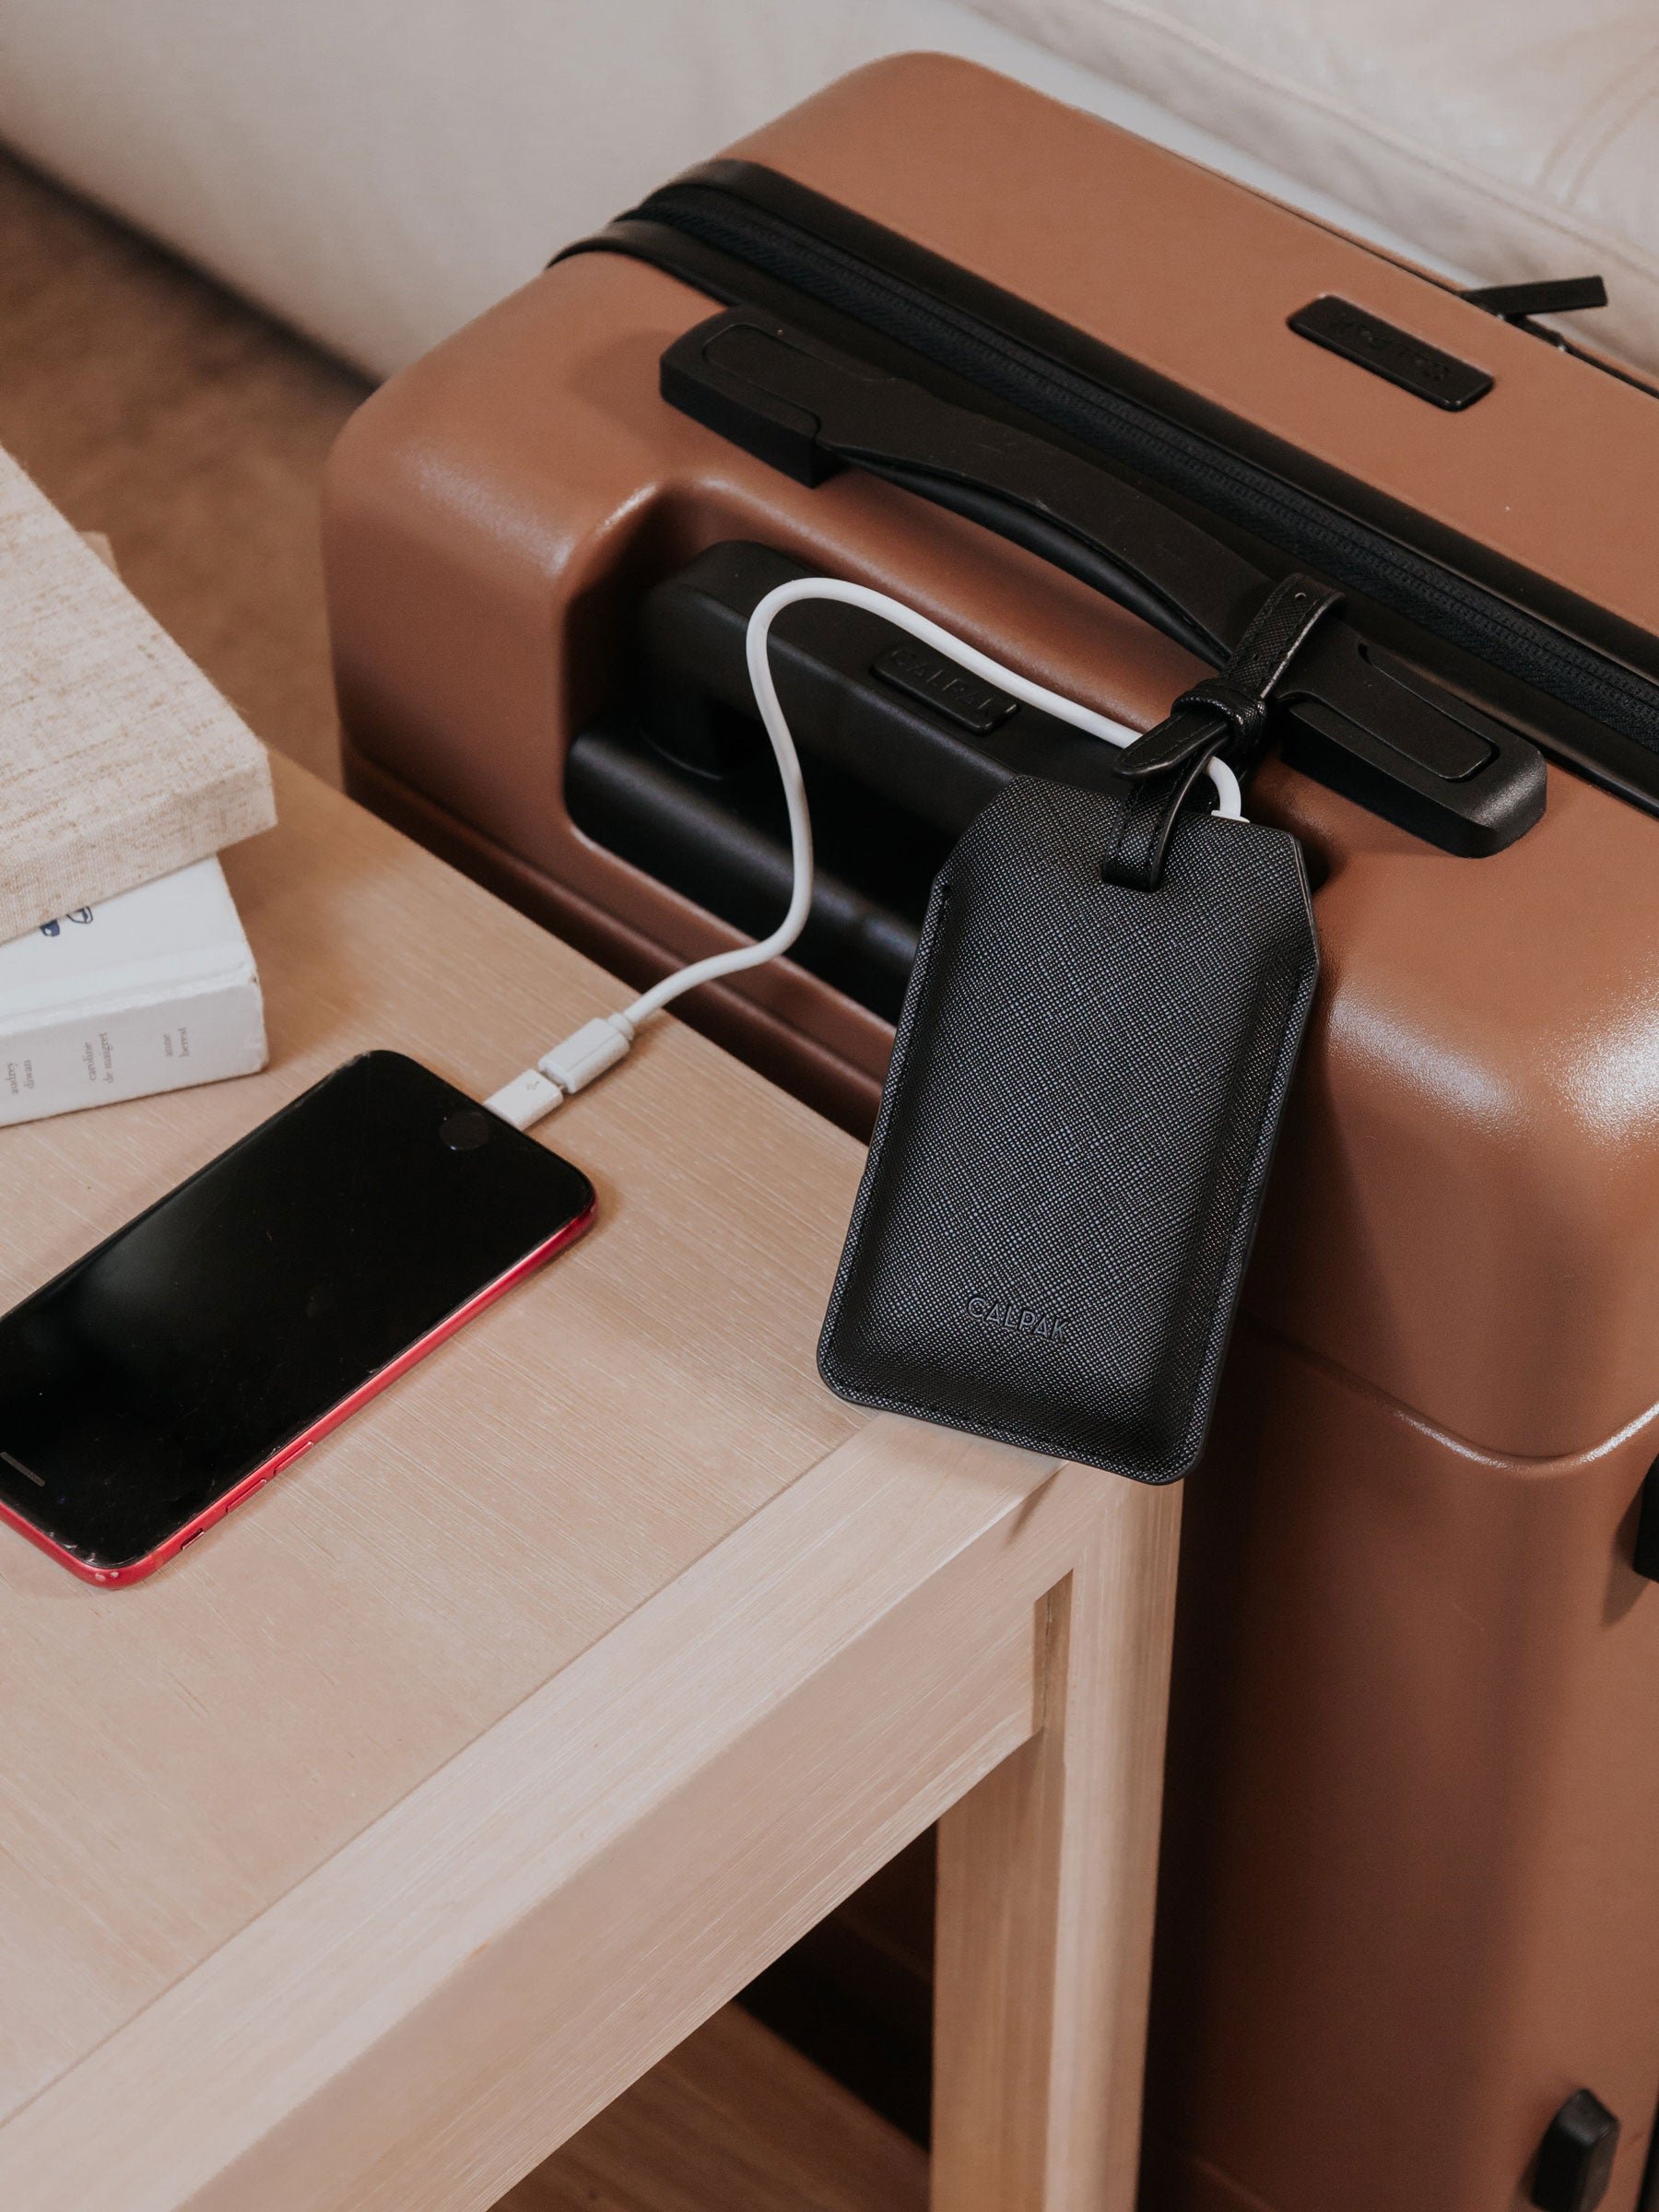 portable luggage tag charger on luggage